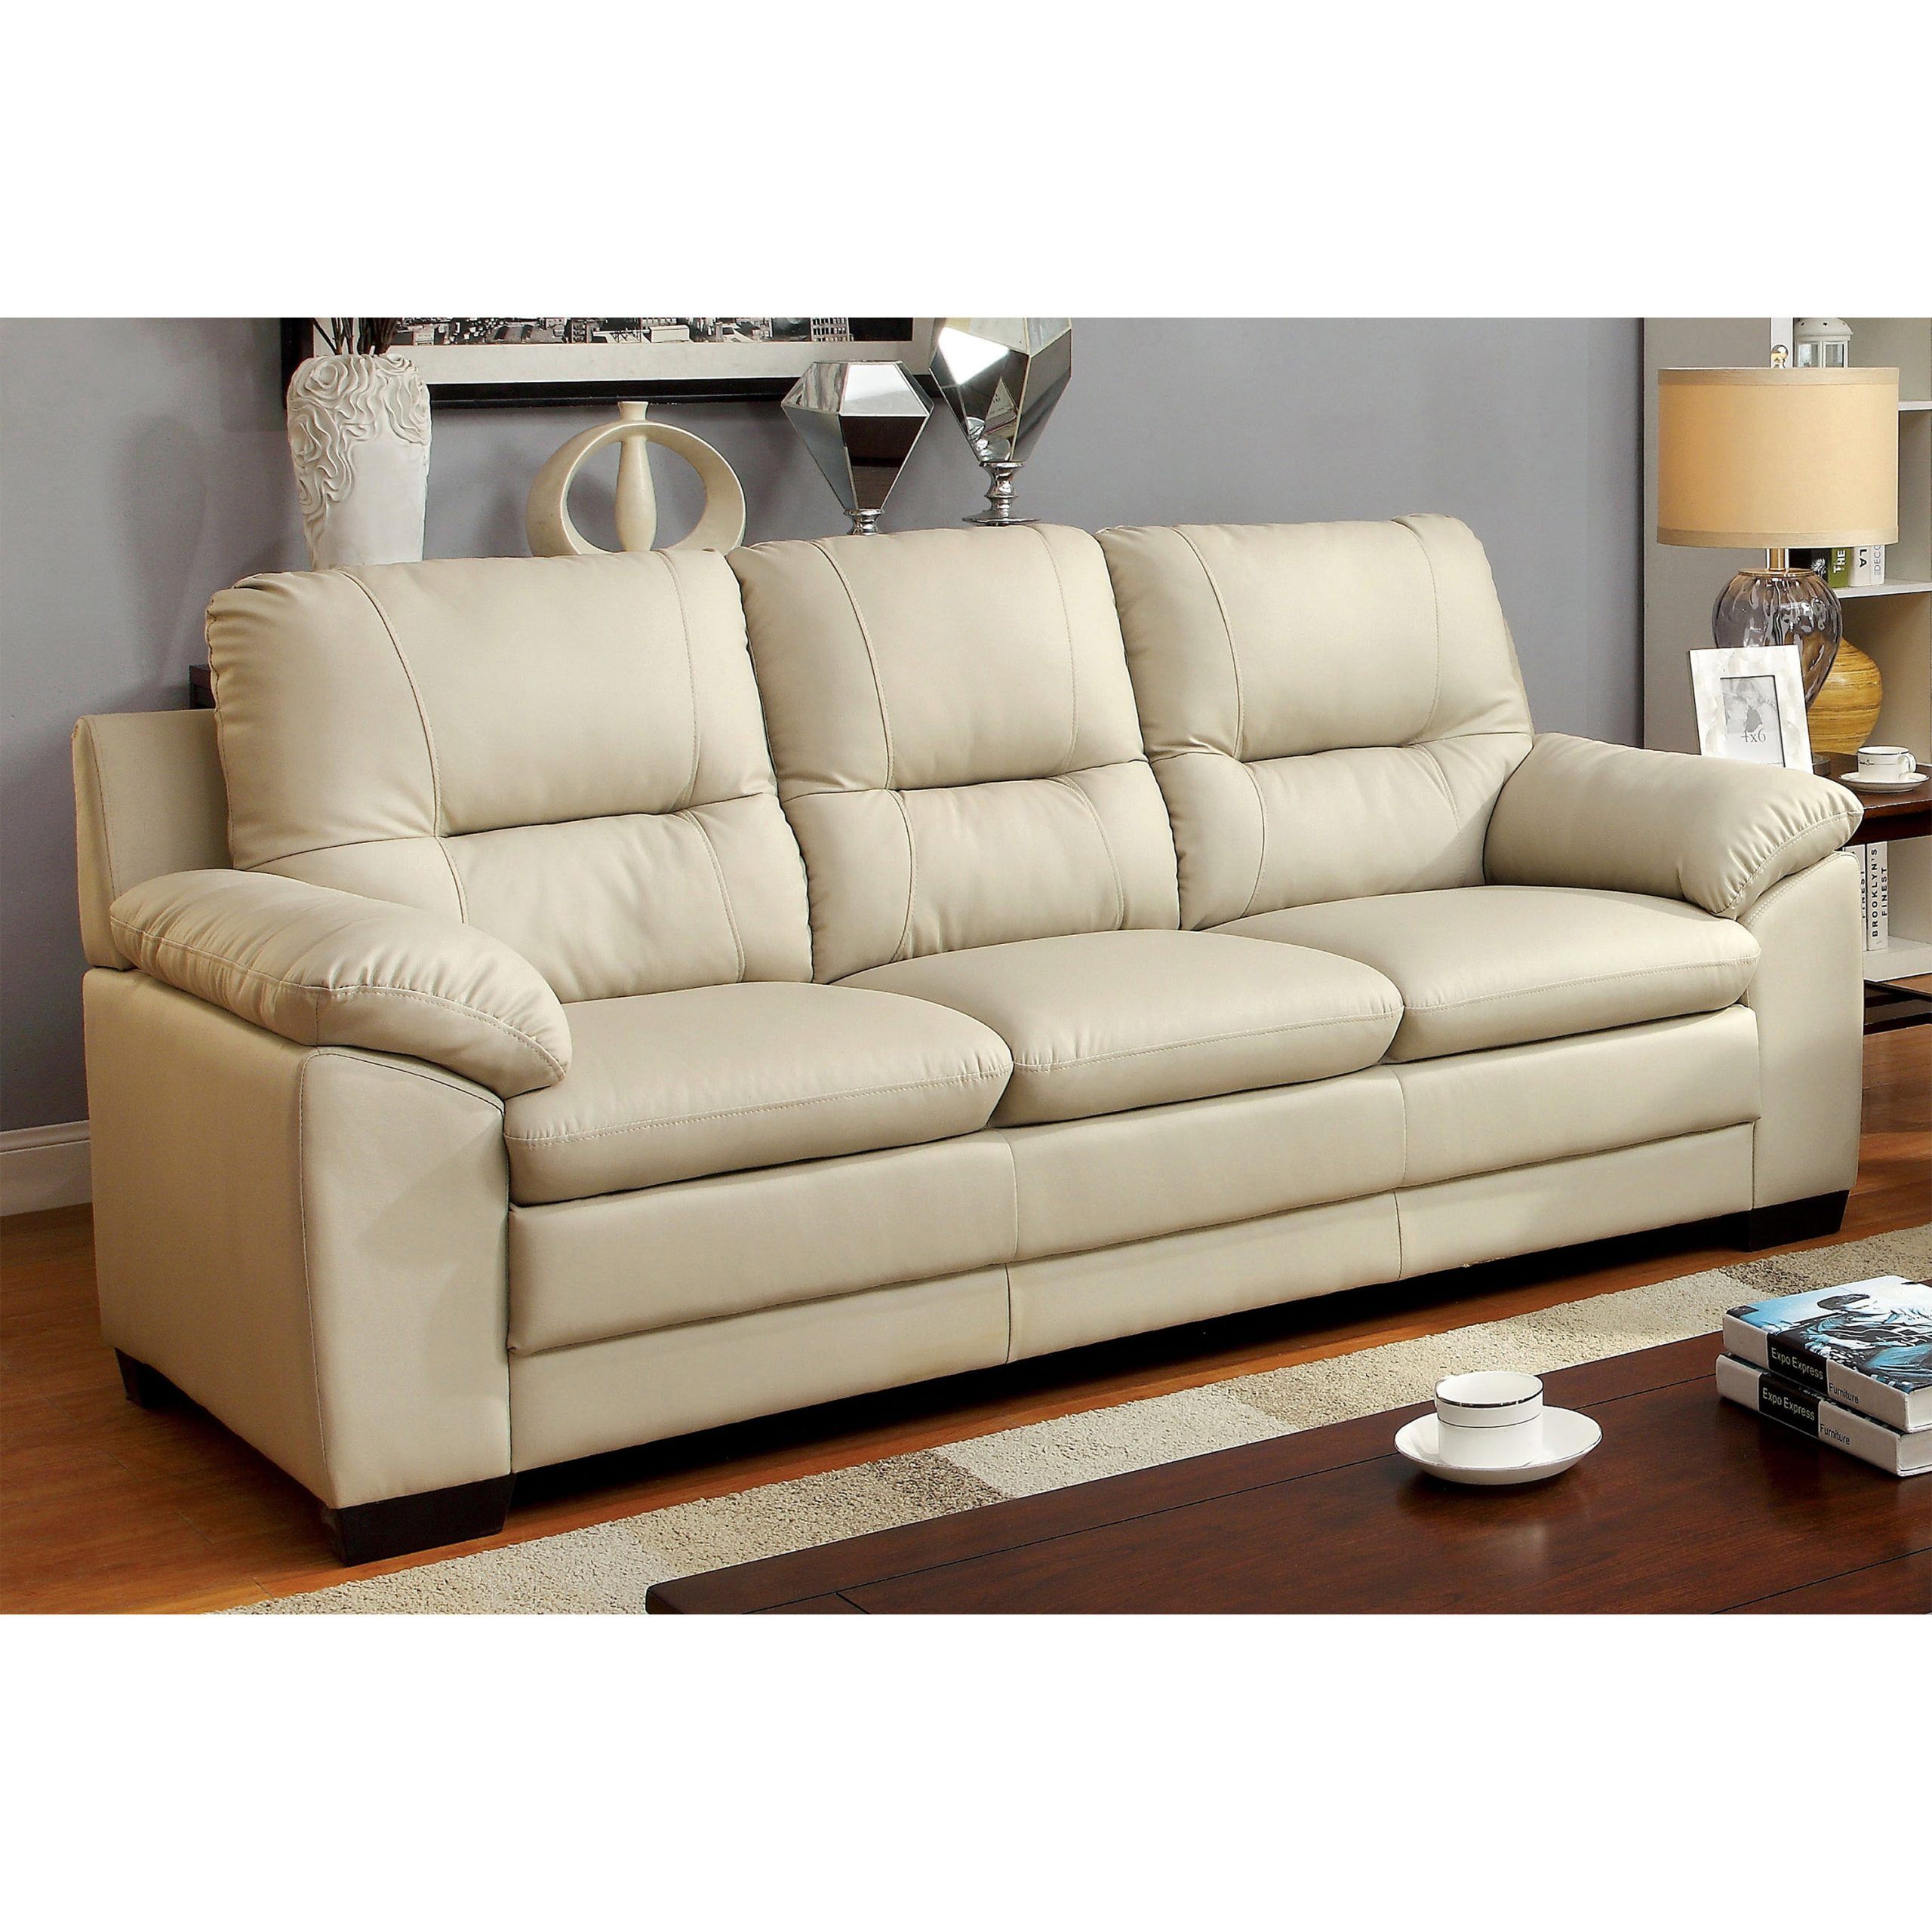 Furniture Of America Contemporary Faux Leather Truman Sofa, Ivory Intended For Faux Leather Sofas (Gallery 2 of 21)